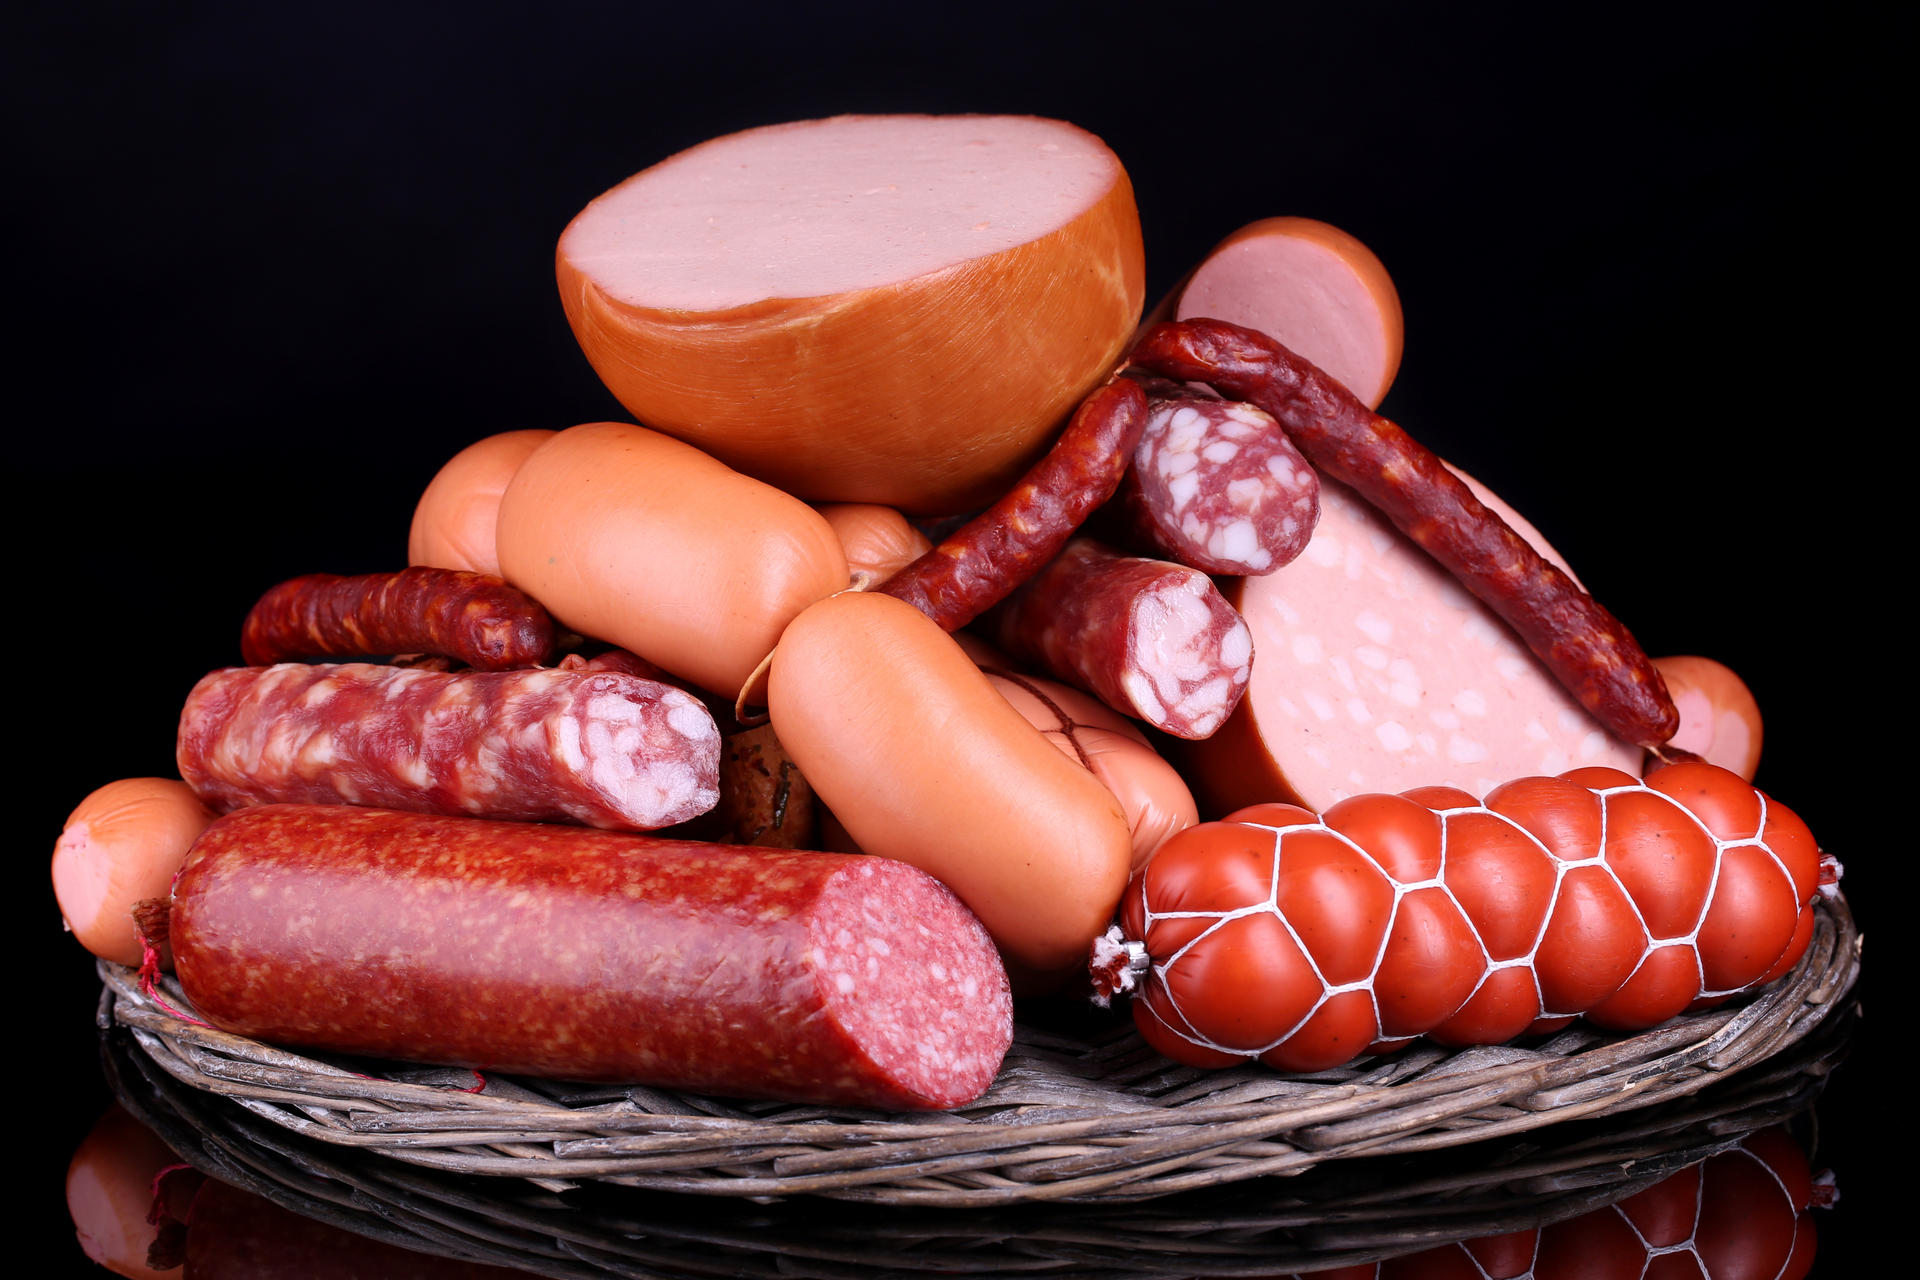 WHO declares processed meat as carcinogenic